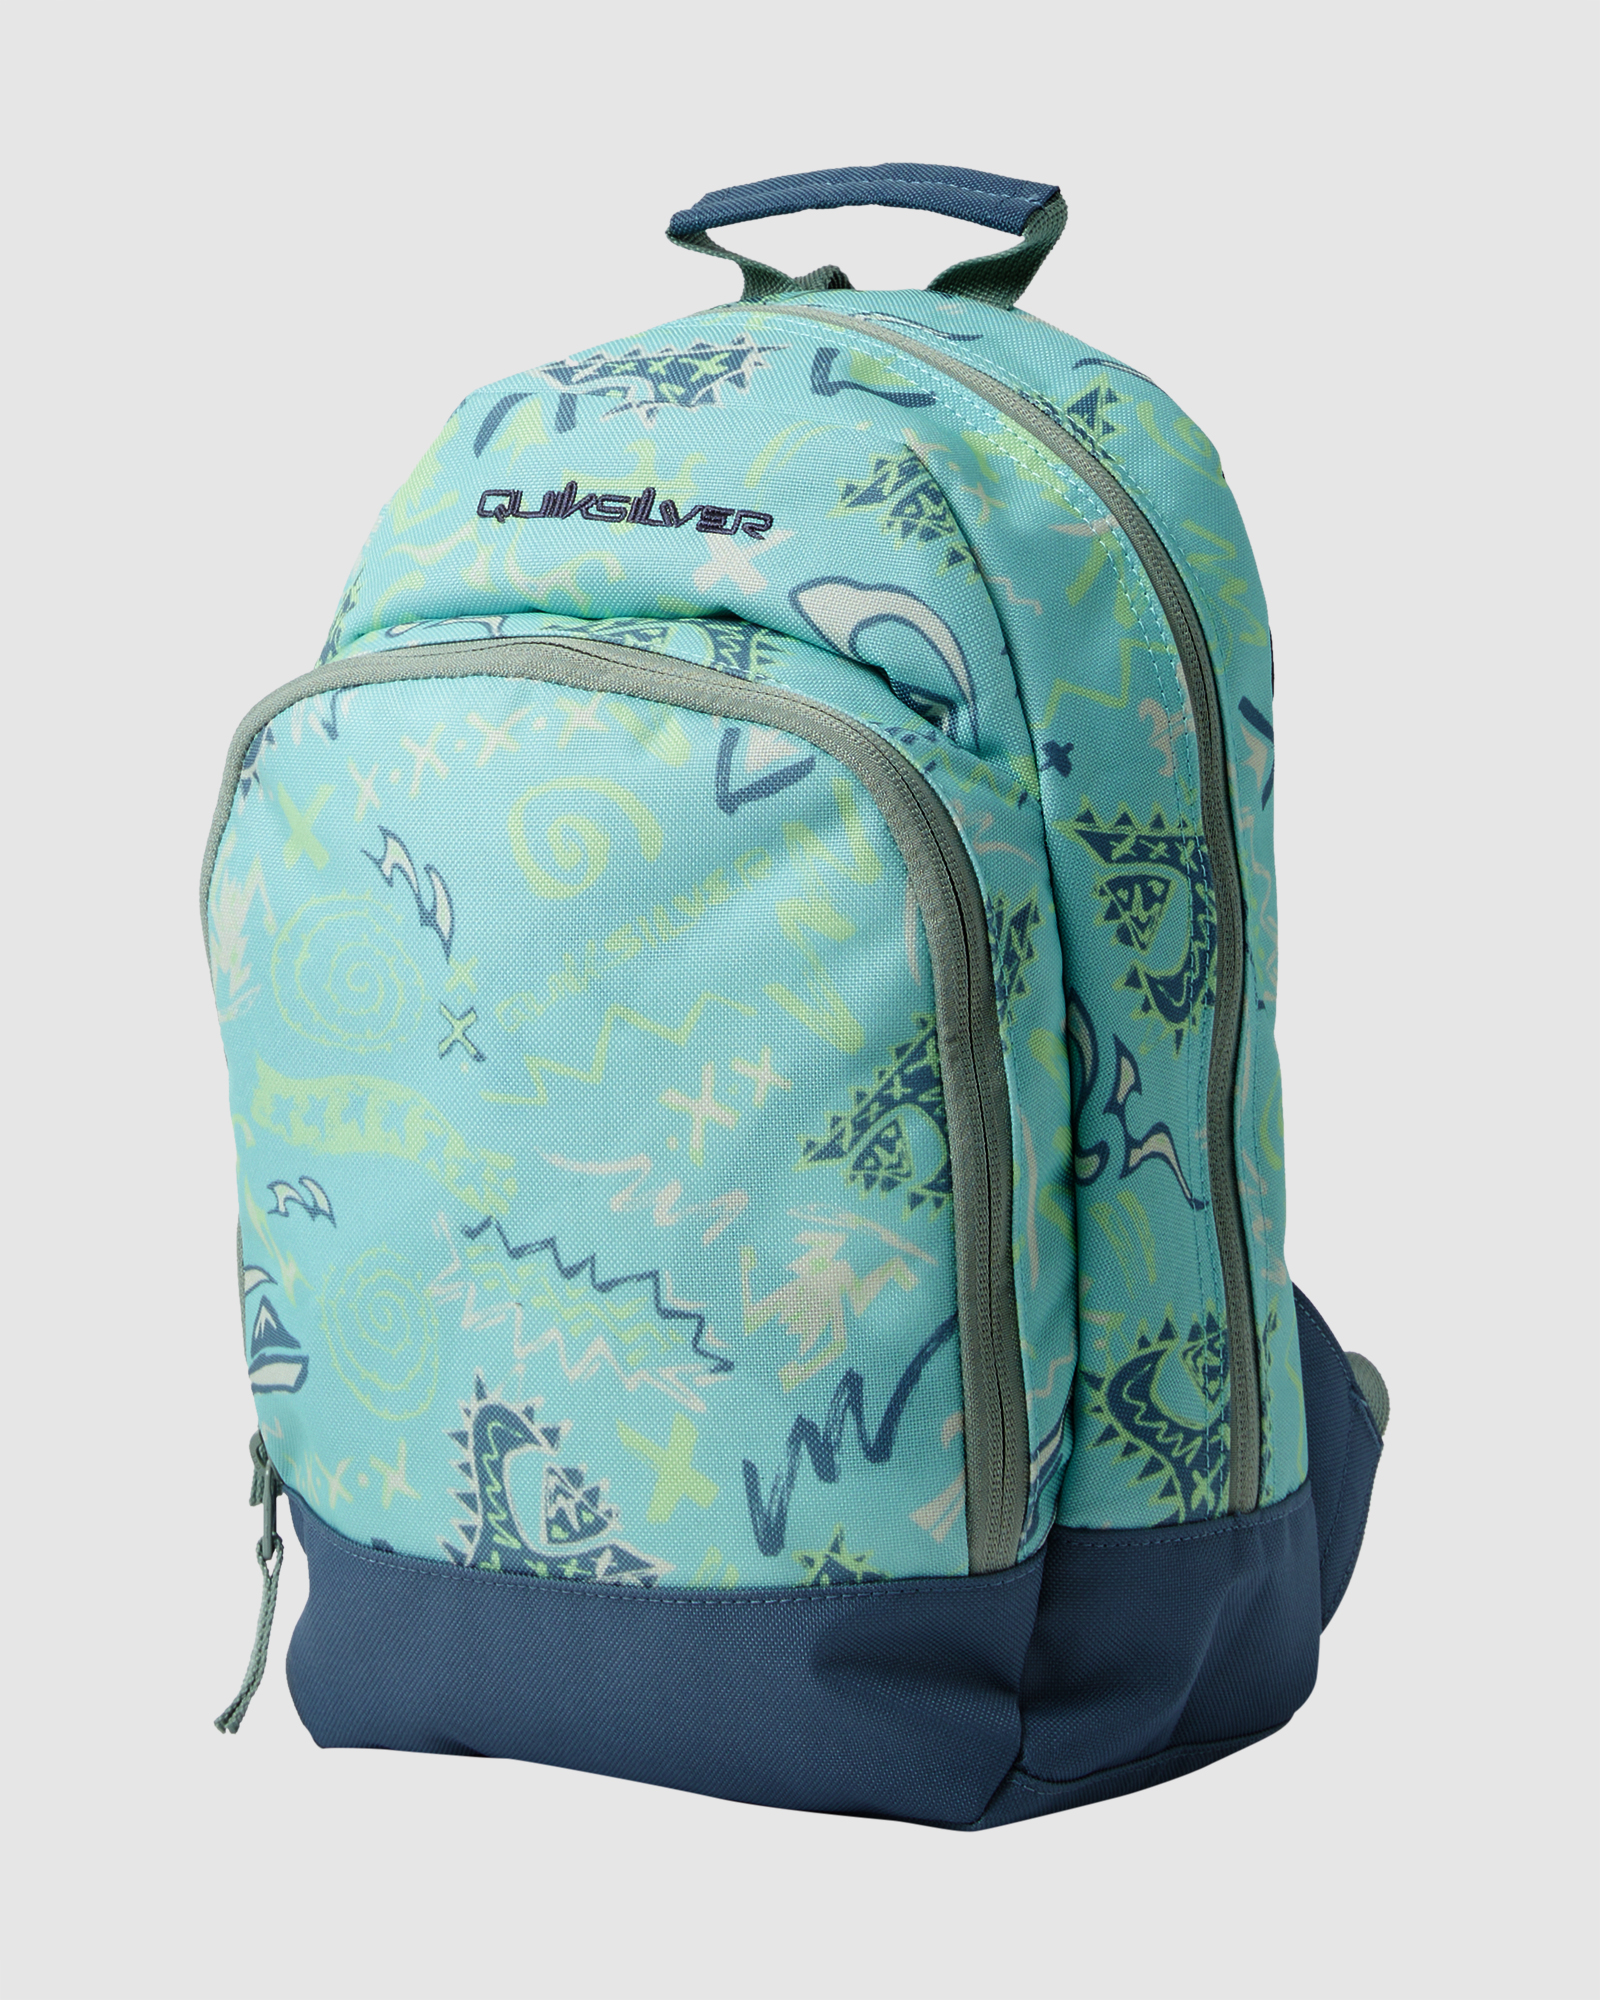 12L | Turquoise Small Pastel - Chomping Quiksilver SurfStitch Backpack